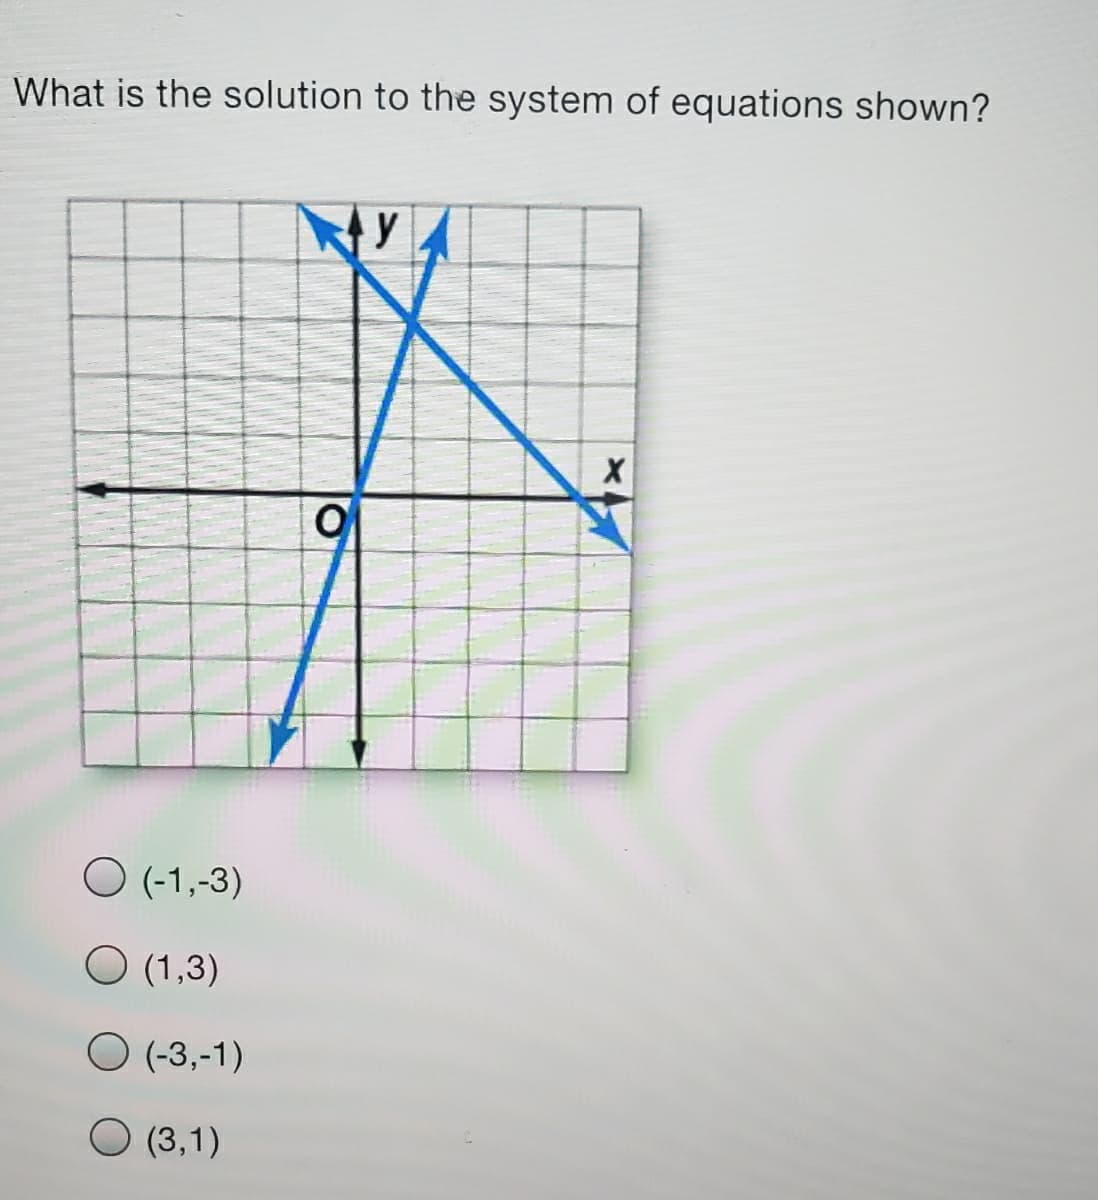 What is the solution to the system of equations shown?
トy
O (-1,-3)
O (1,3)
O (-3,-1)
O (3,1)
